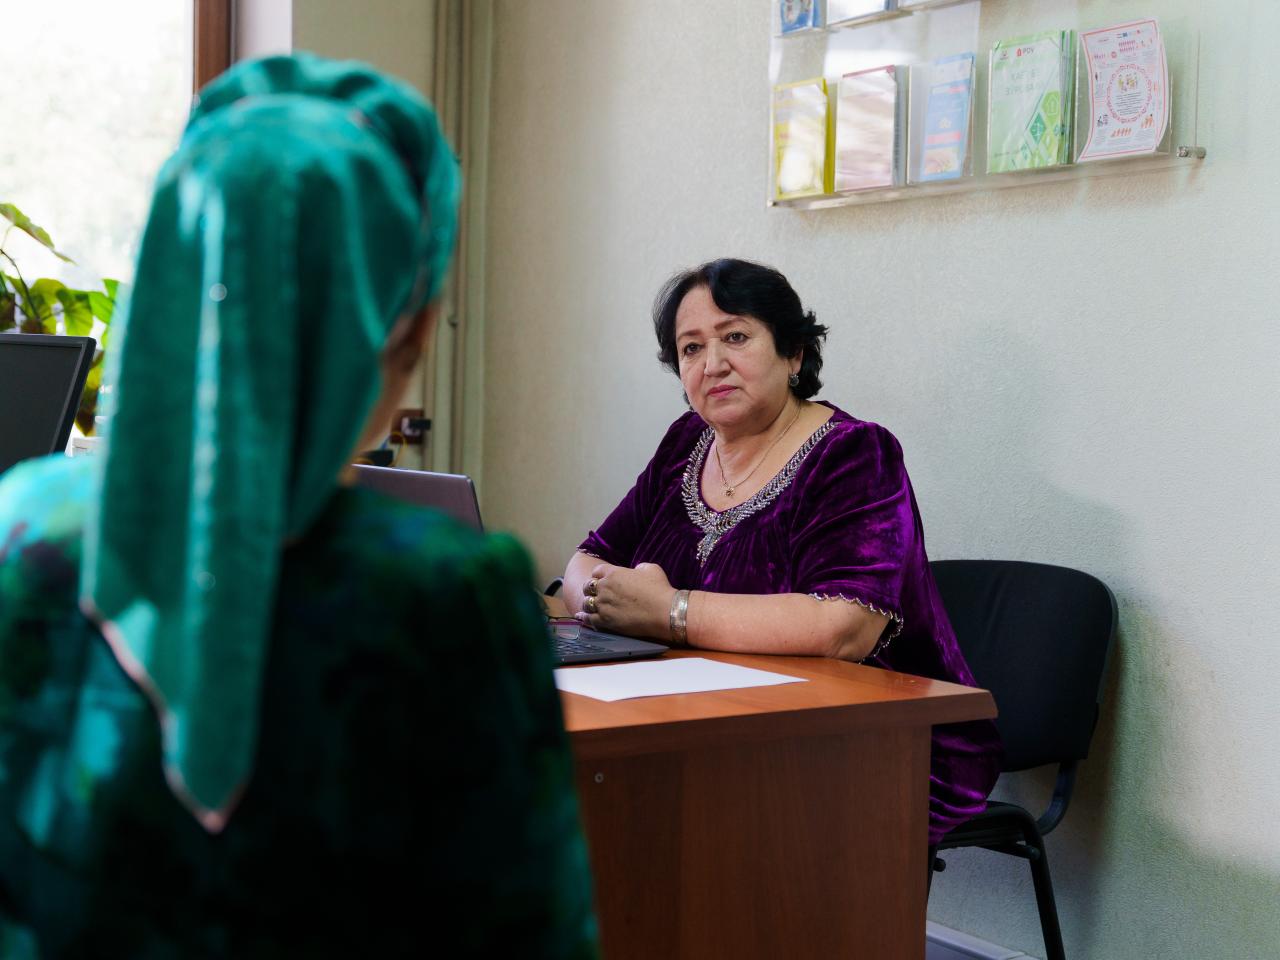 A woman in a purple dress behind a desk speaking to a woman with a green head covering